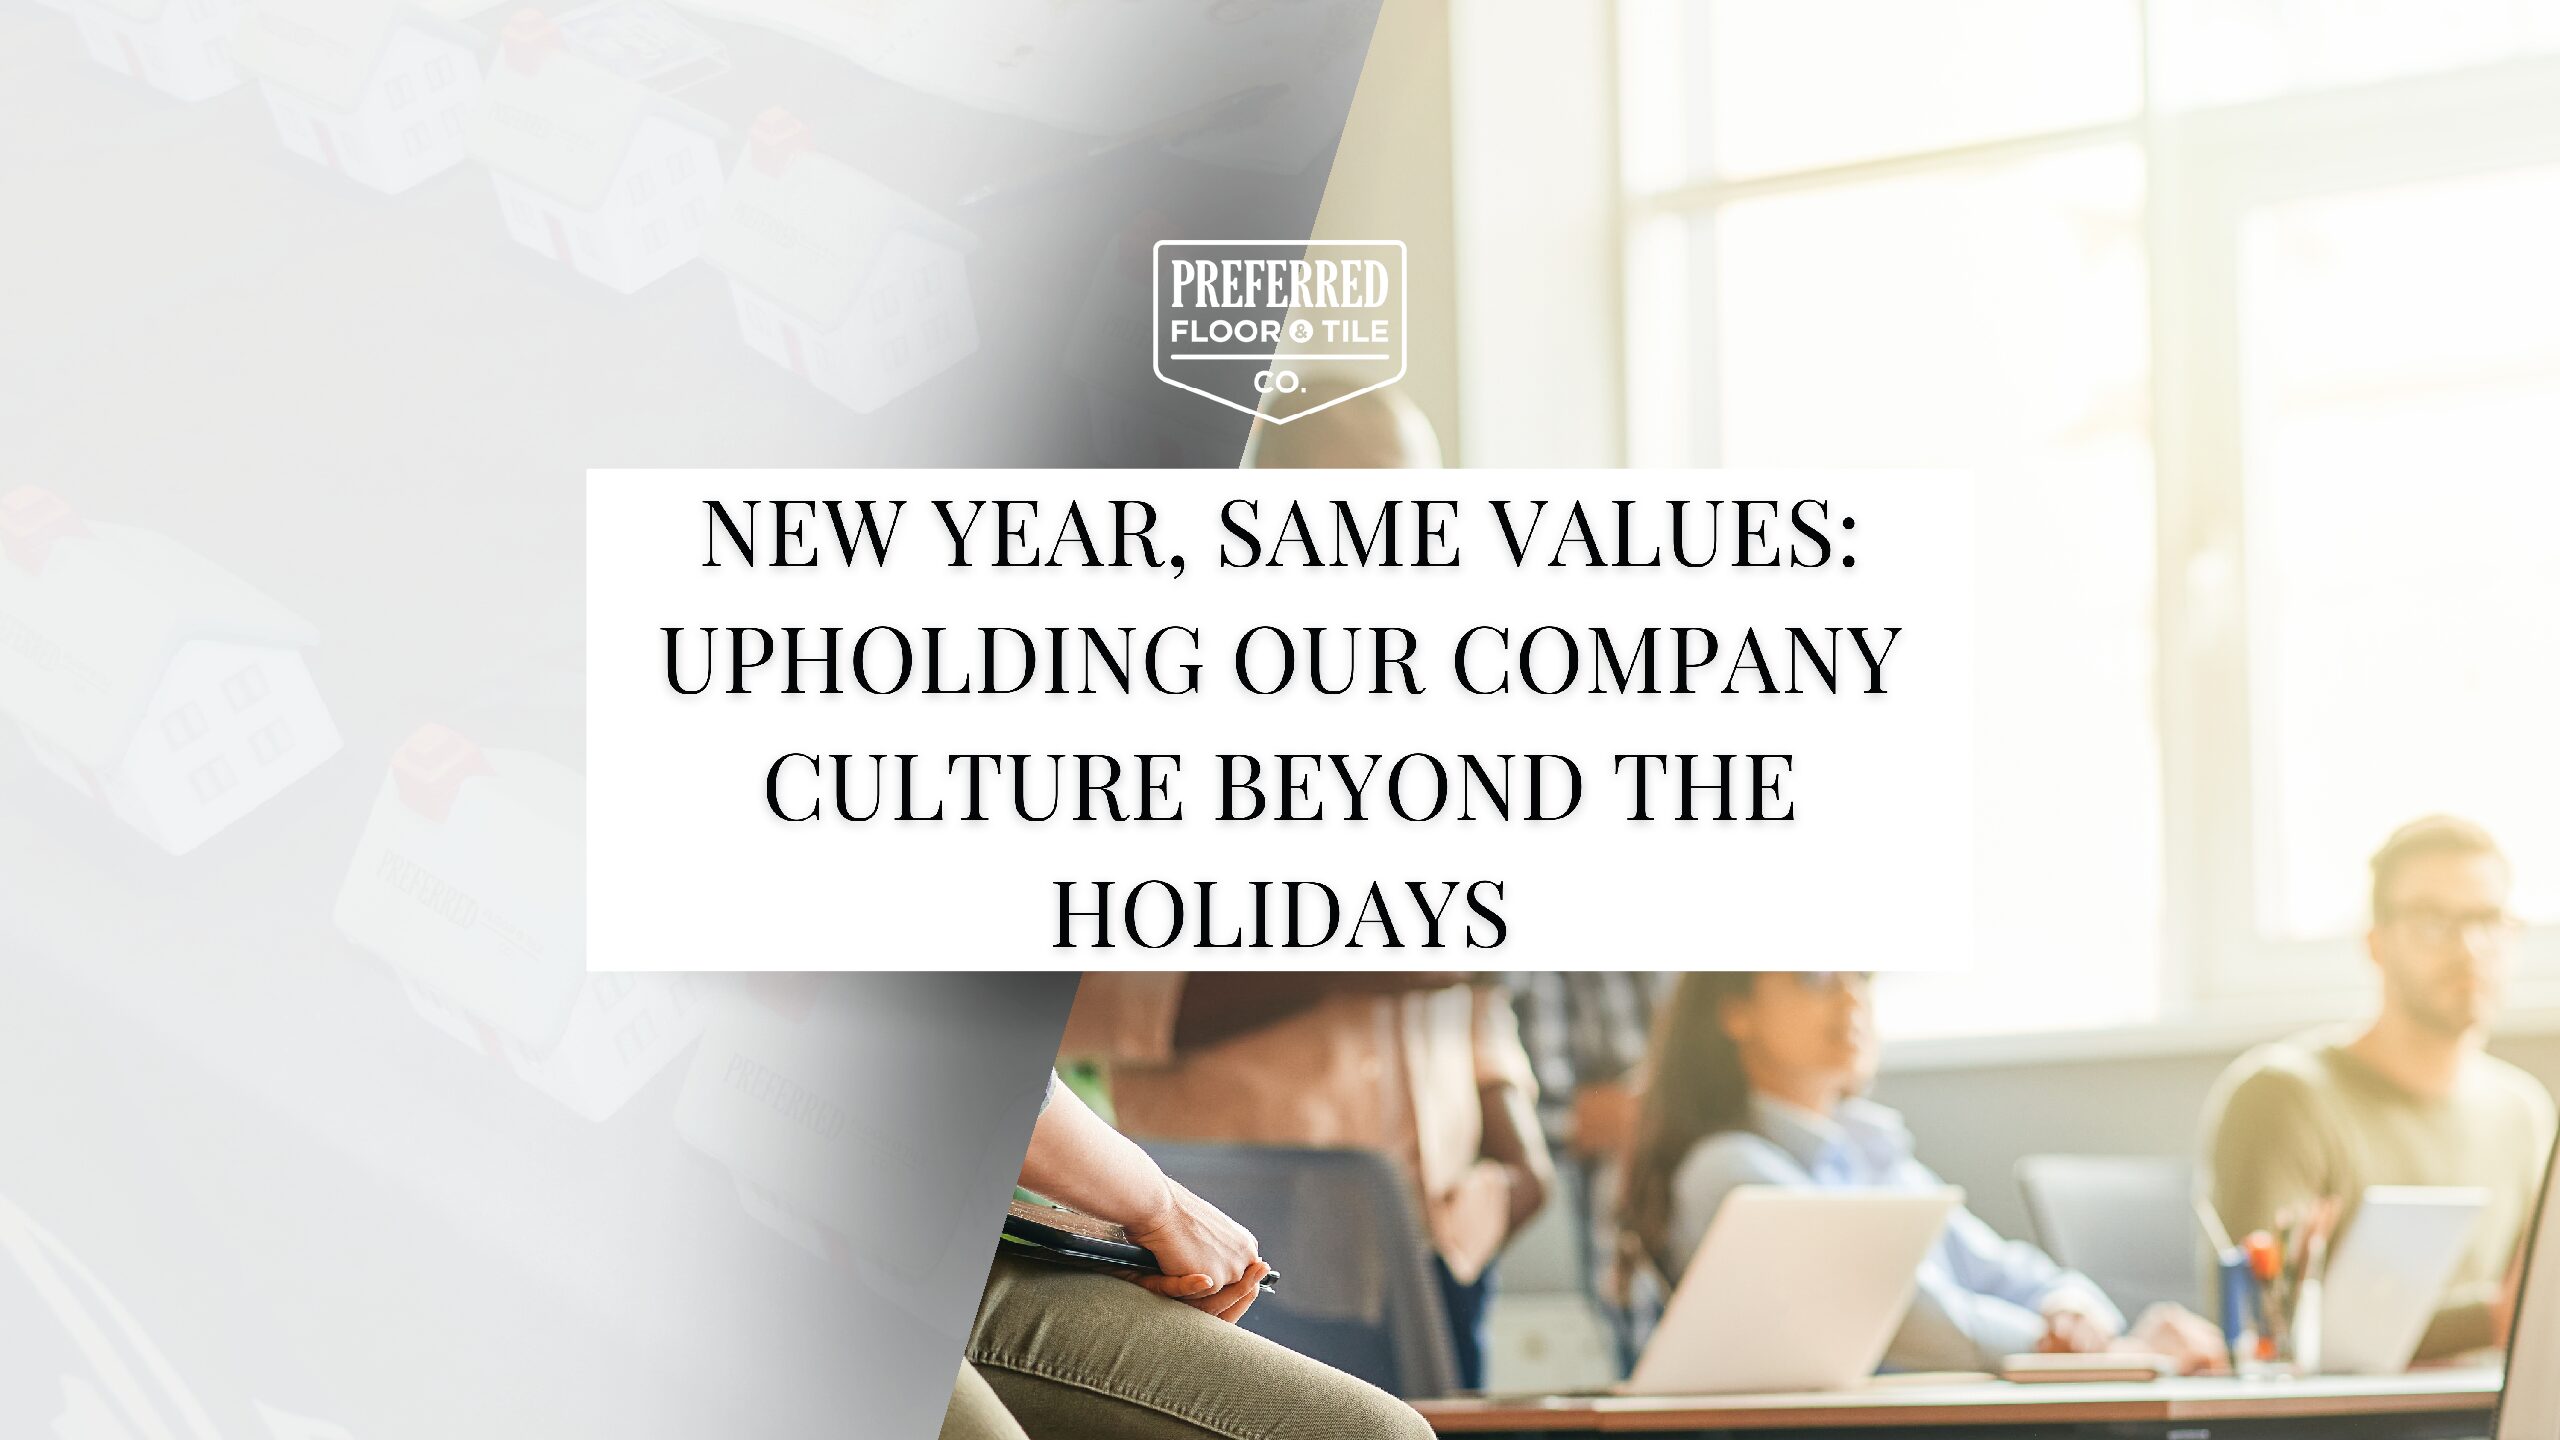 New Year, Same Values: Upholding Our Company Culture Beyond the Holidays